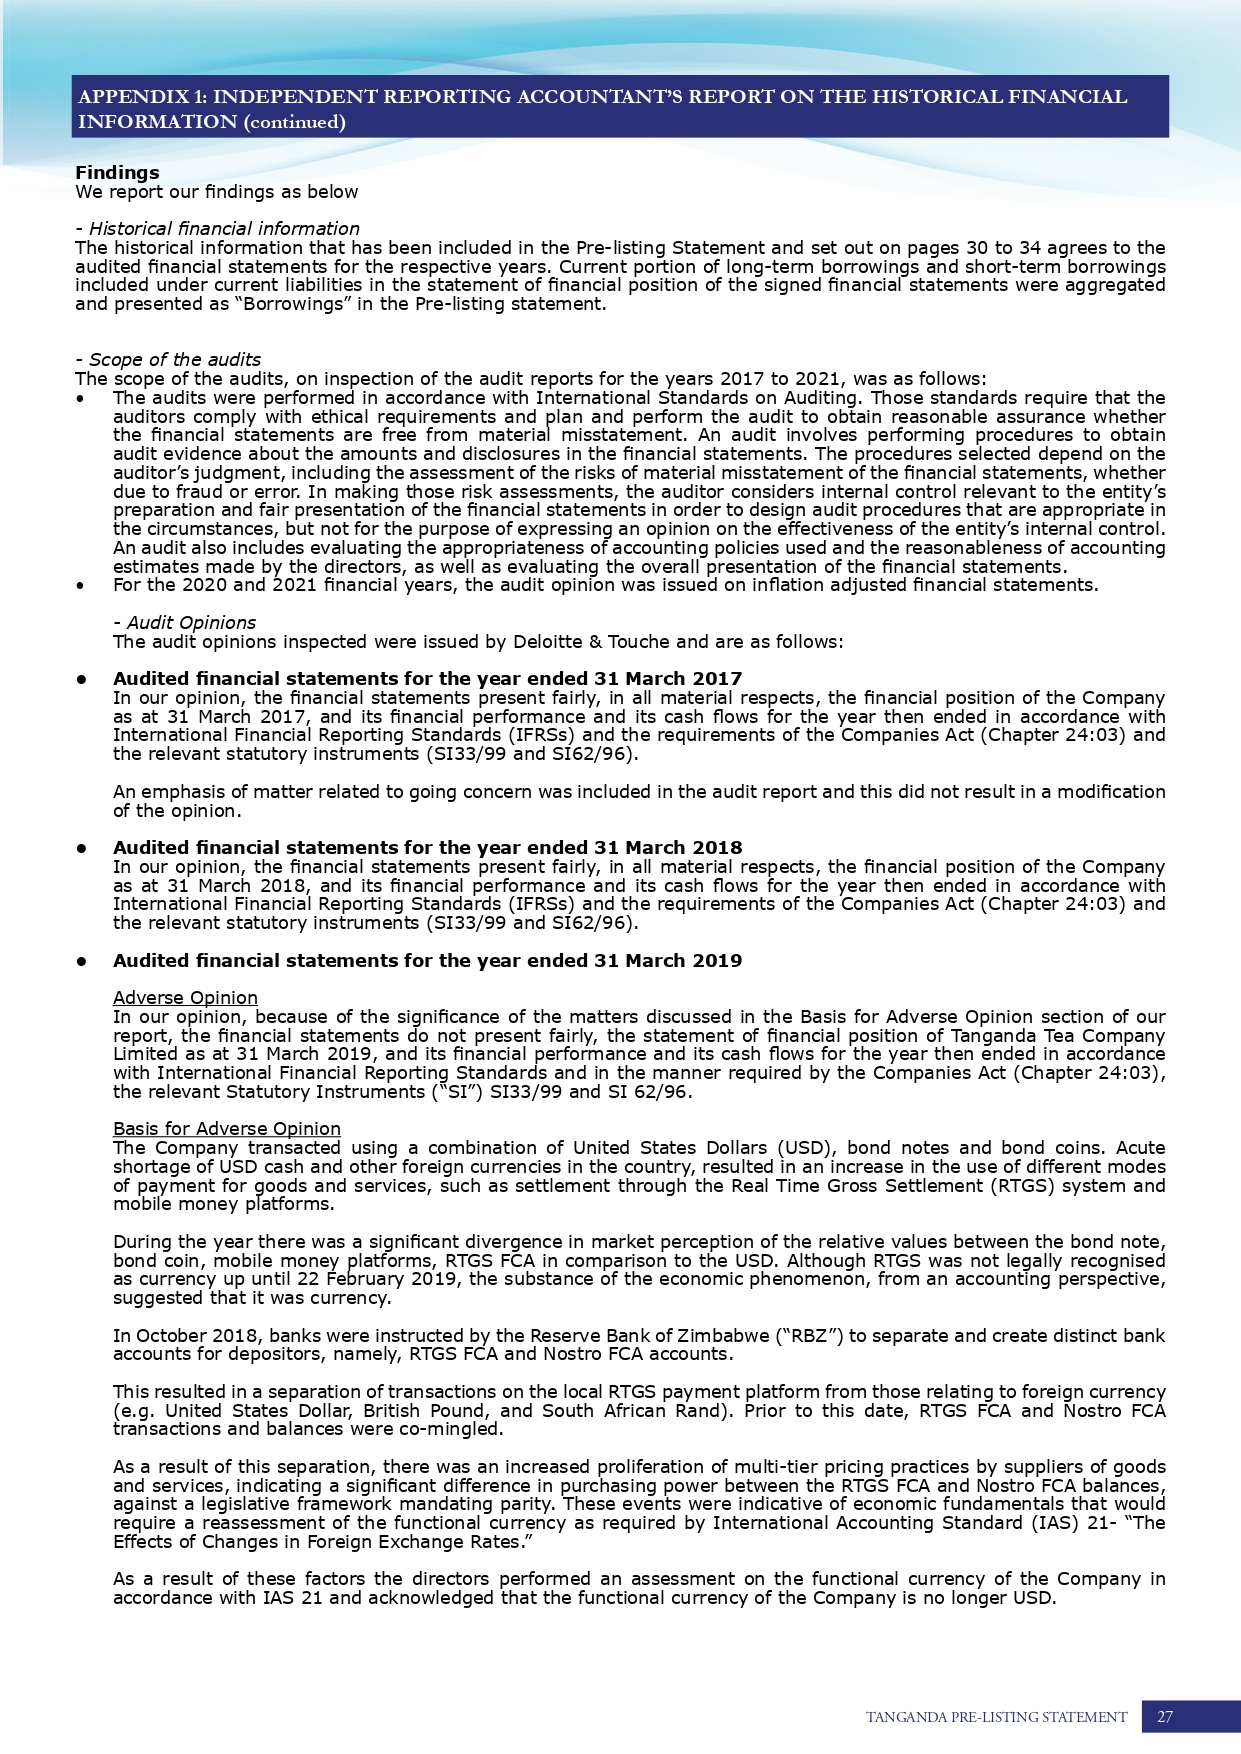 Tanganda Pre-Listing Statement 2021_pages-to-jpg-0029